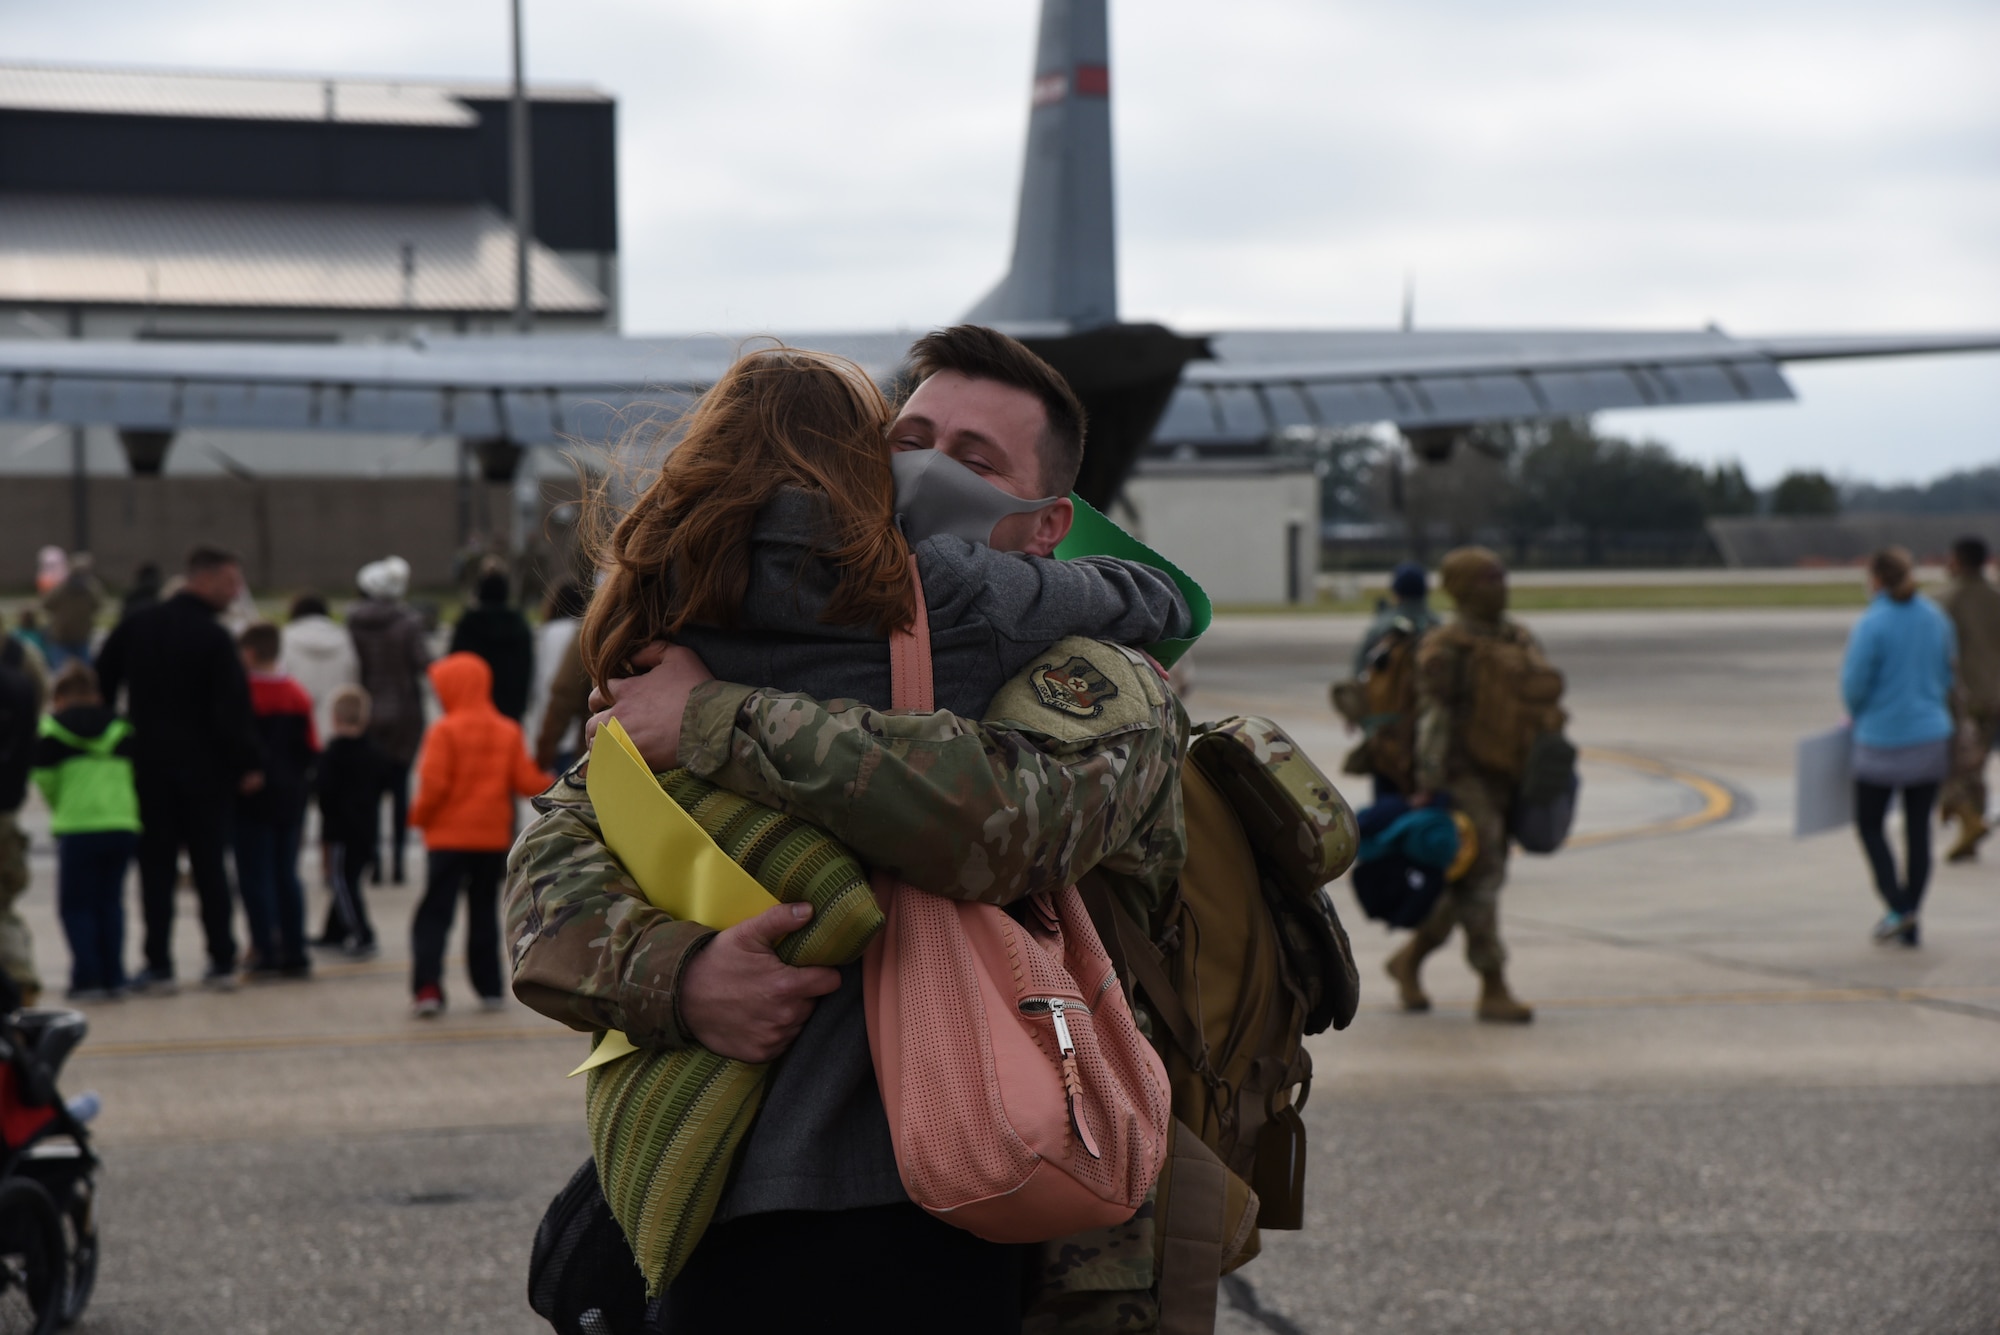 Family members await the return of their Reserve Citizen Airmen to Keesler Air Force Base, Mississippi, Feb. 13, 2021. Airmen from the 815th Airlift Squadron and maintenance and personnel from throughout the 403rd Wing were deployed to Southwest Asia where they supported Operations Freedom Sentinel and Inherent Resolve. (U.S. Air Force photo by Lt. Col. Marnee A.C. Losurdo)